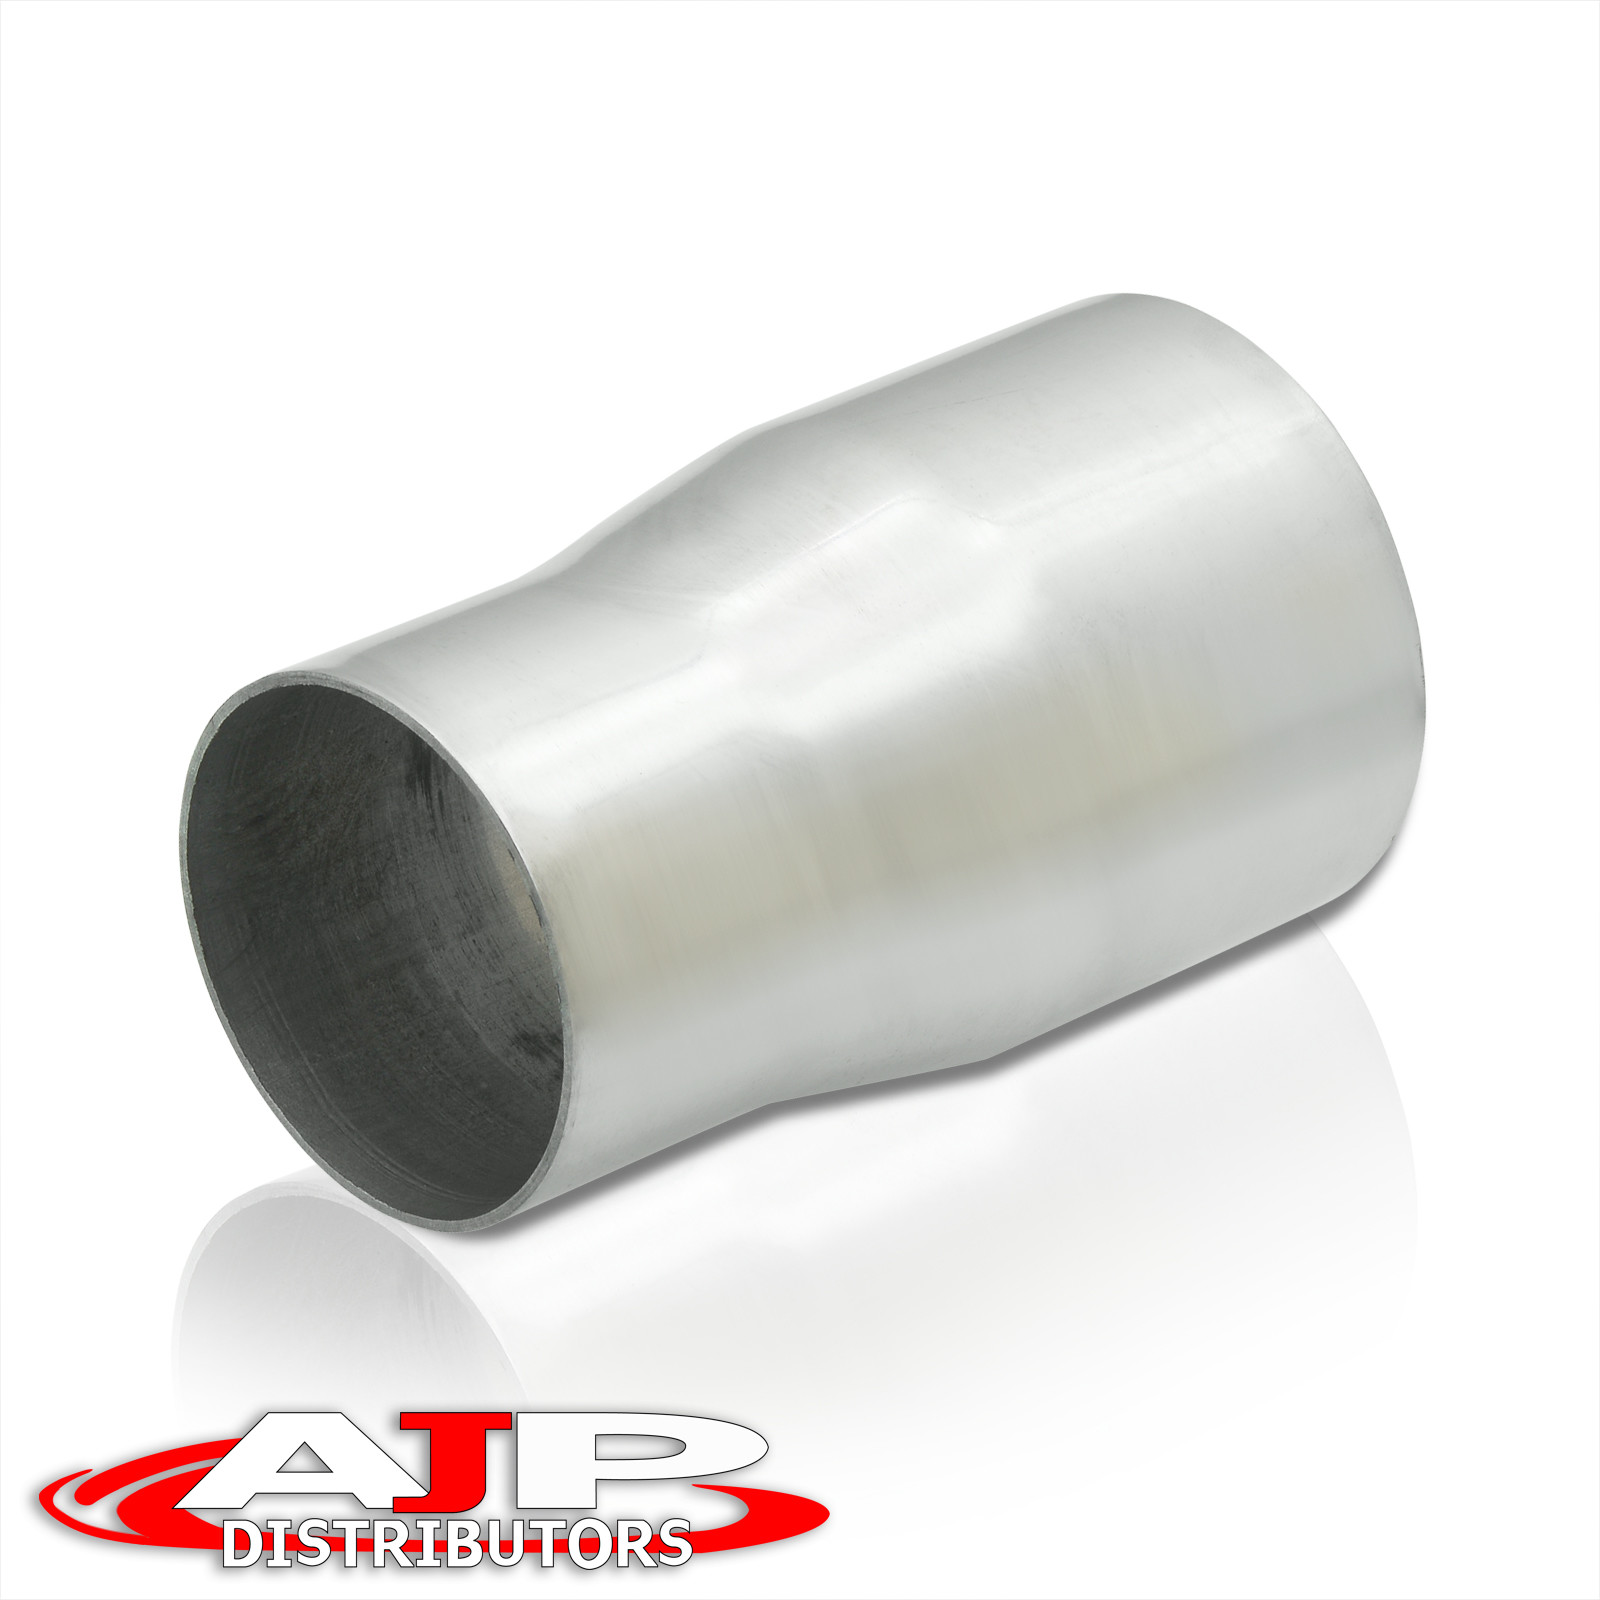 2.5/" OD To 3/" OD Aluminum Reducer Pipe For Turbo Intercooler Intake Piping